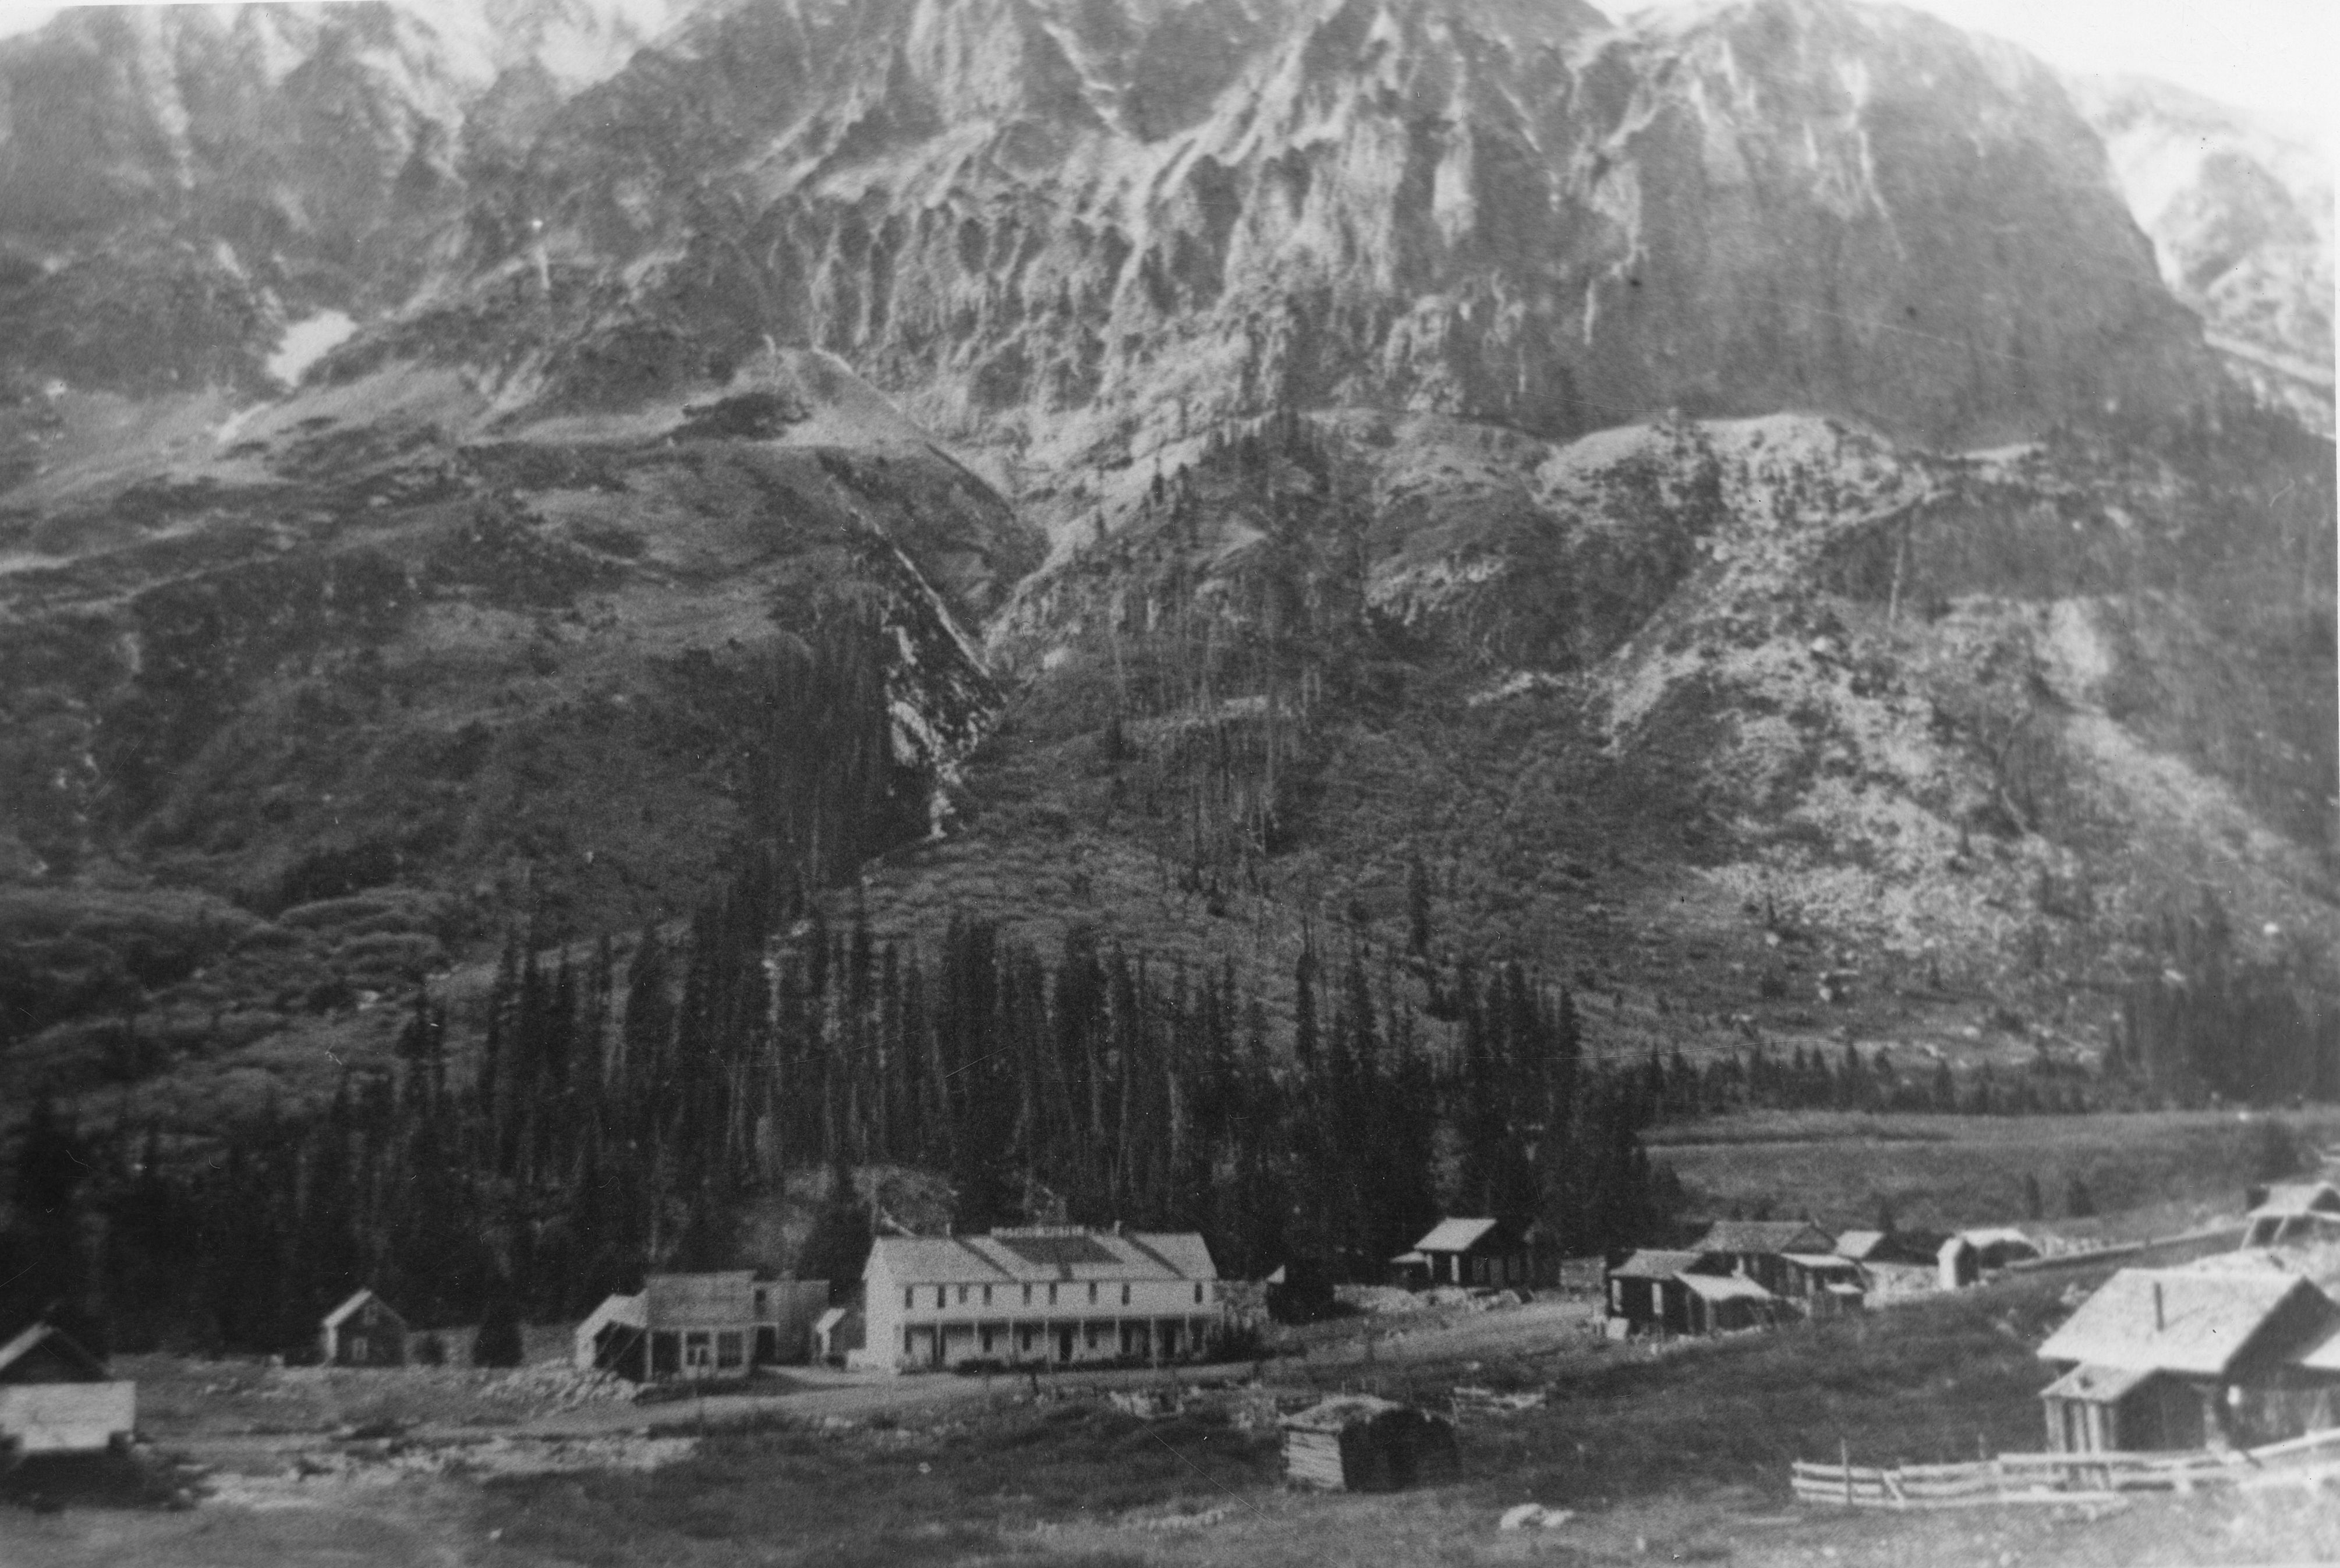 Photo of the town of Gothic, Colorado, dating from the 1880s. Buildings stand at the foot of a rocky mountain which has been dusted with snow. Most of the buildings are small one-story cabins, and one building in the center of the photo is a large white two-story building.